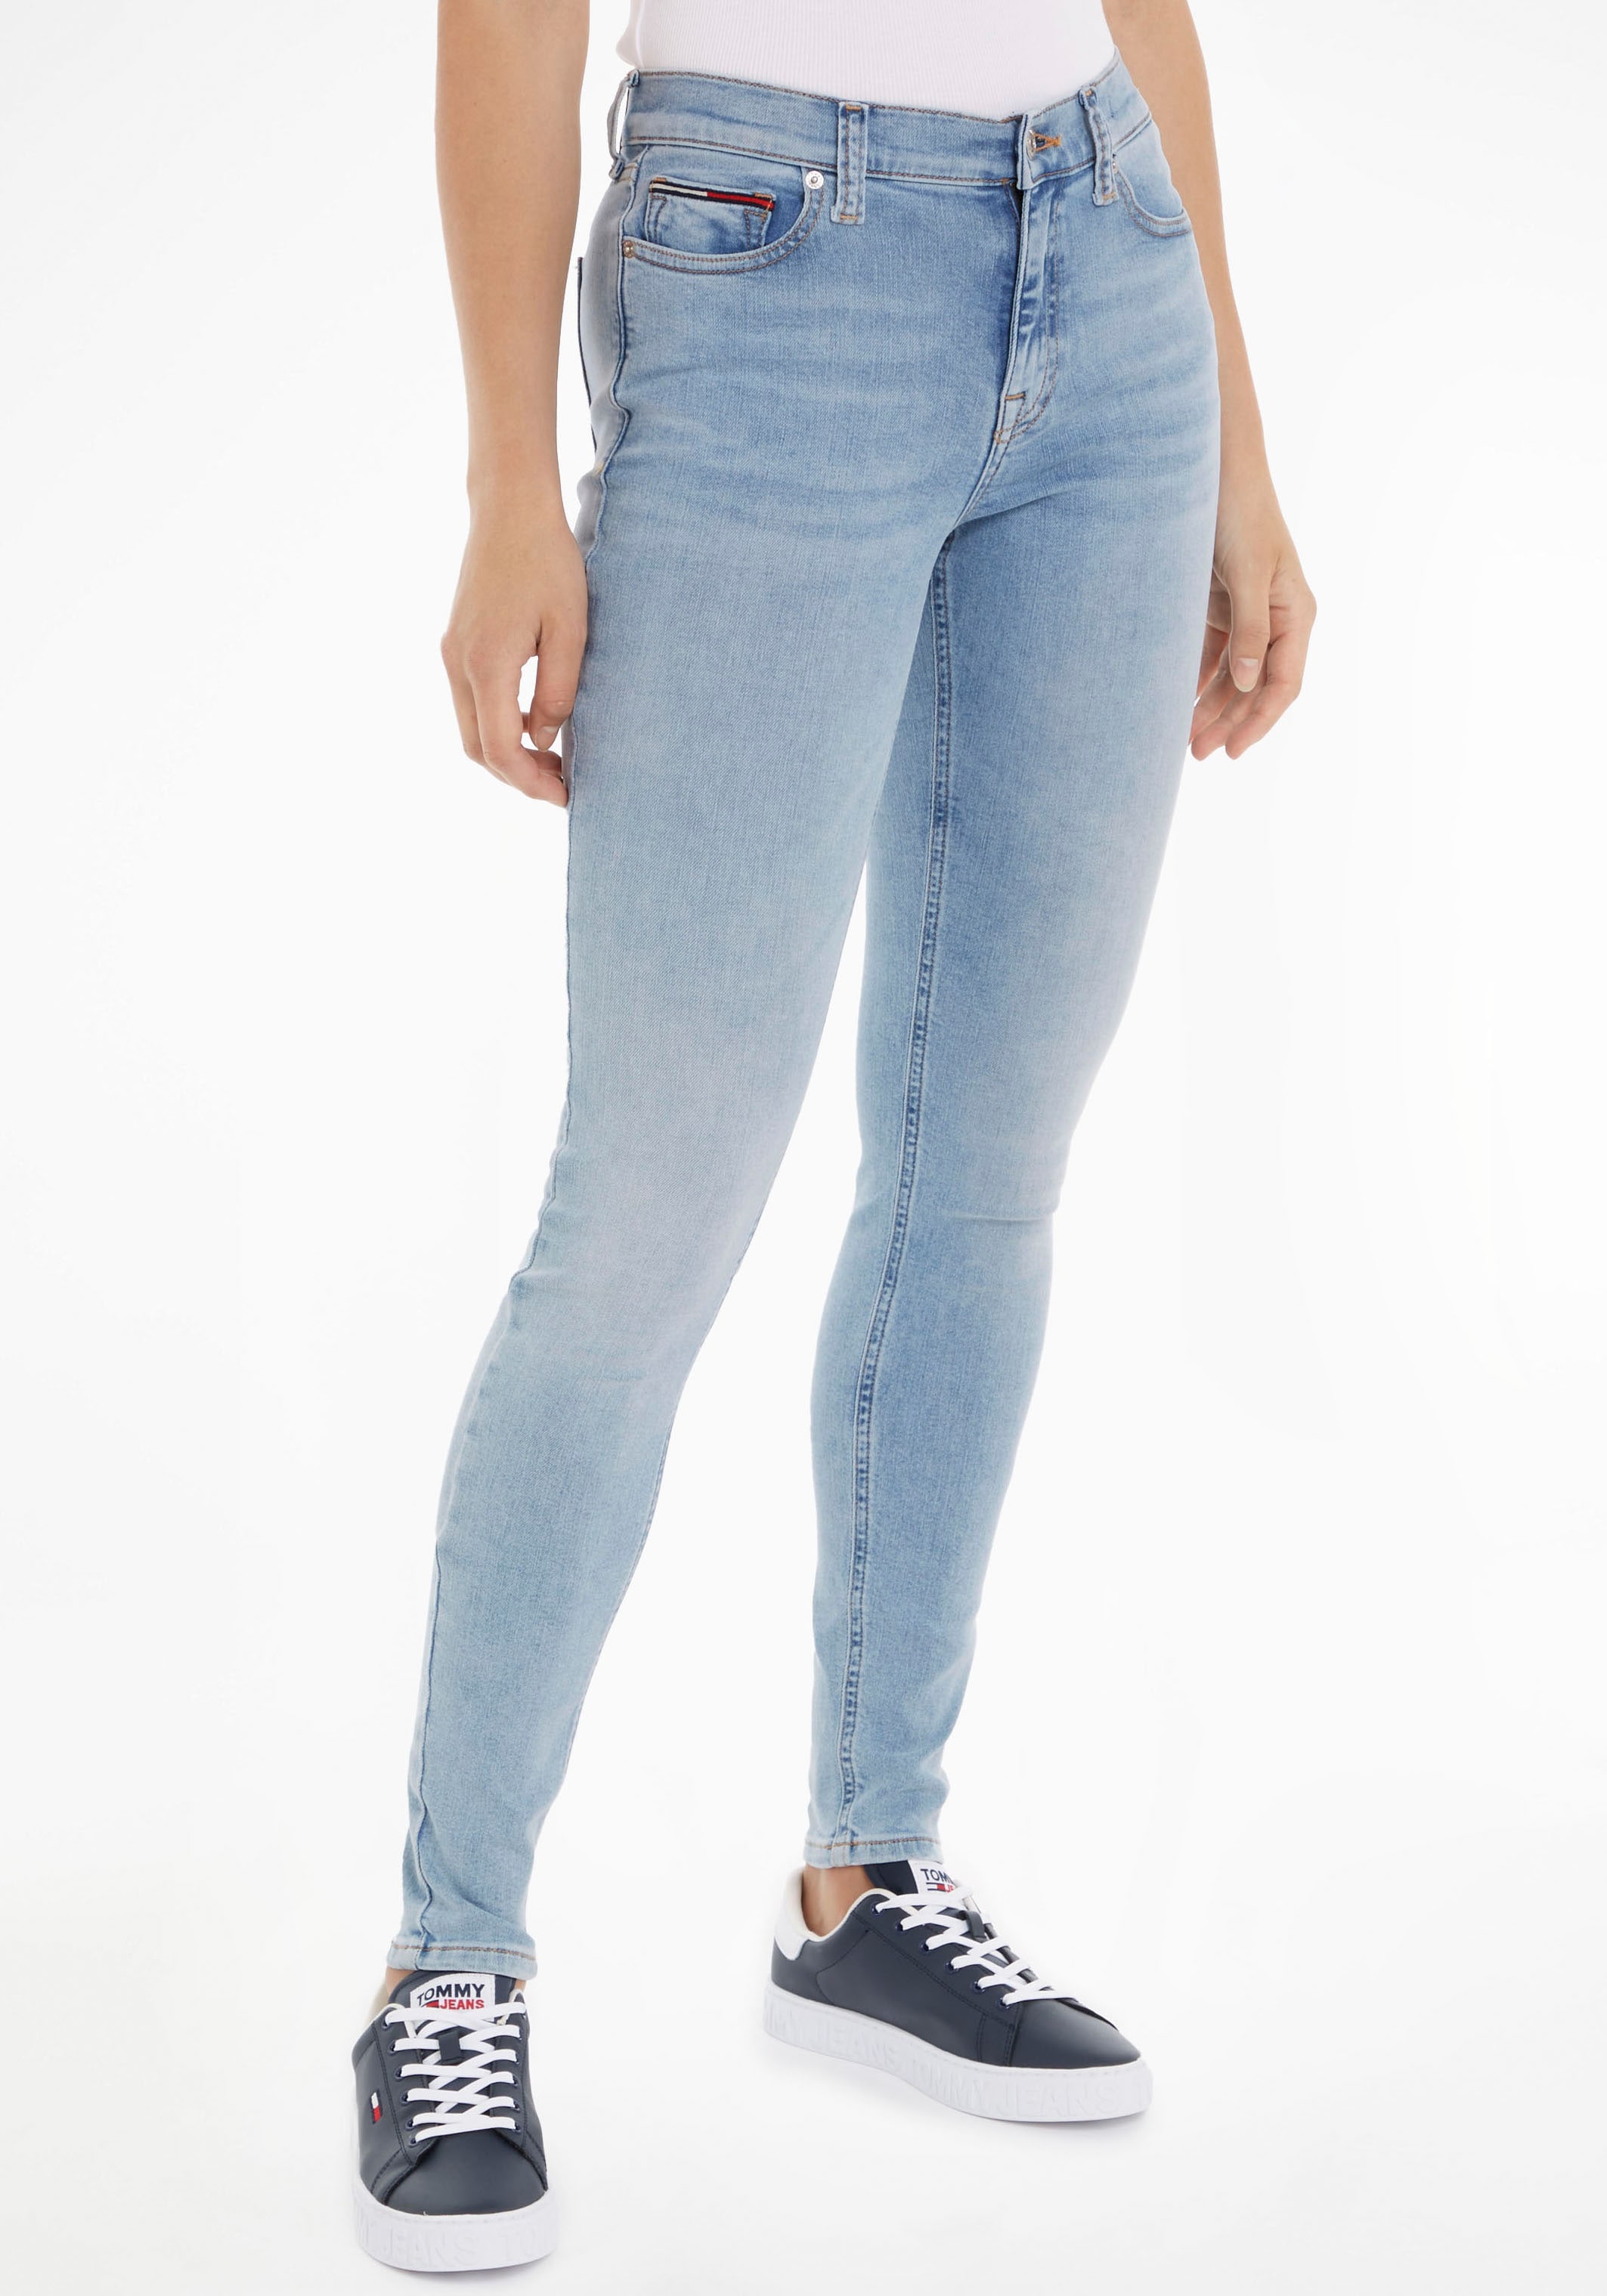 im Tommy Label-Badge Jeans OTTO hinten »Nora«, Tommy Skinny-fit-Jeans Shop Passe Jeans mit & Online